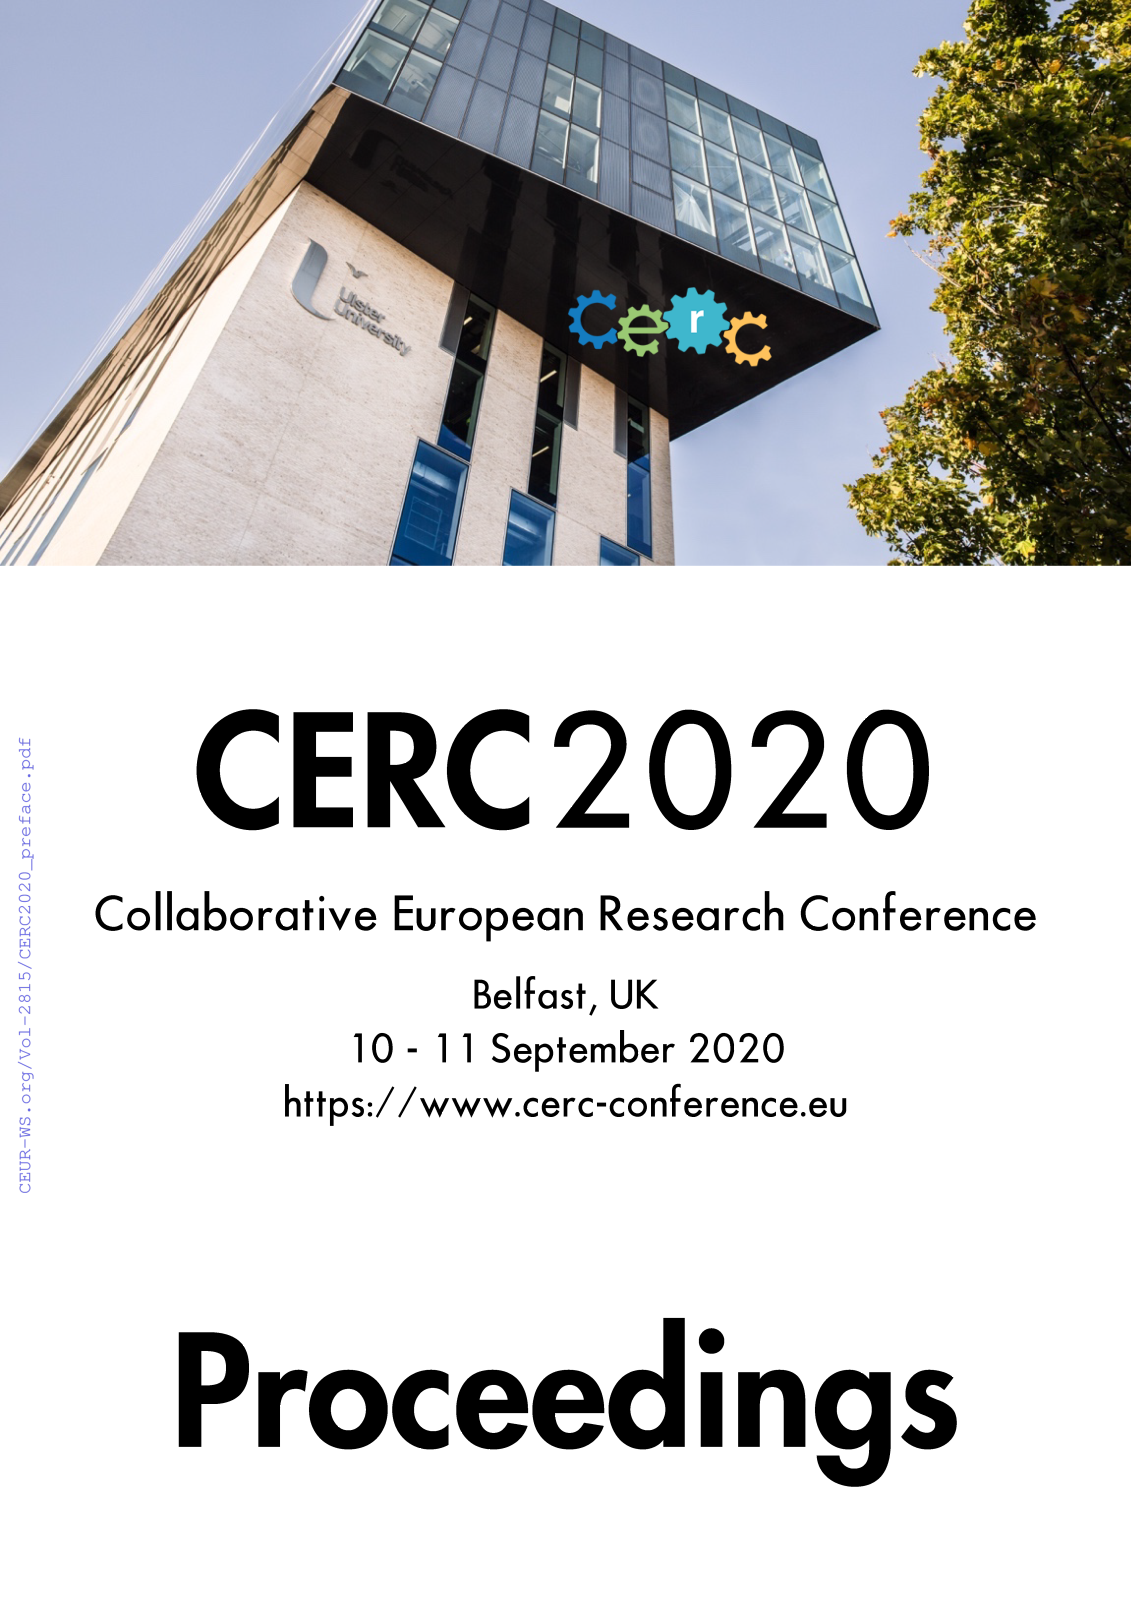 Proceedings of the 6th Collaborative European Research Conference (CERC 2020)